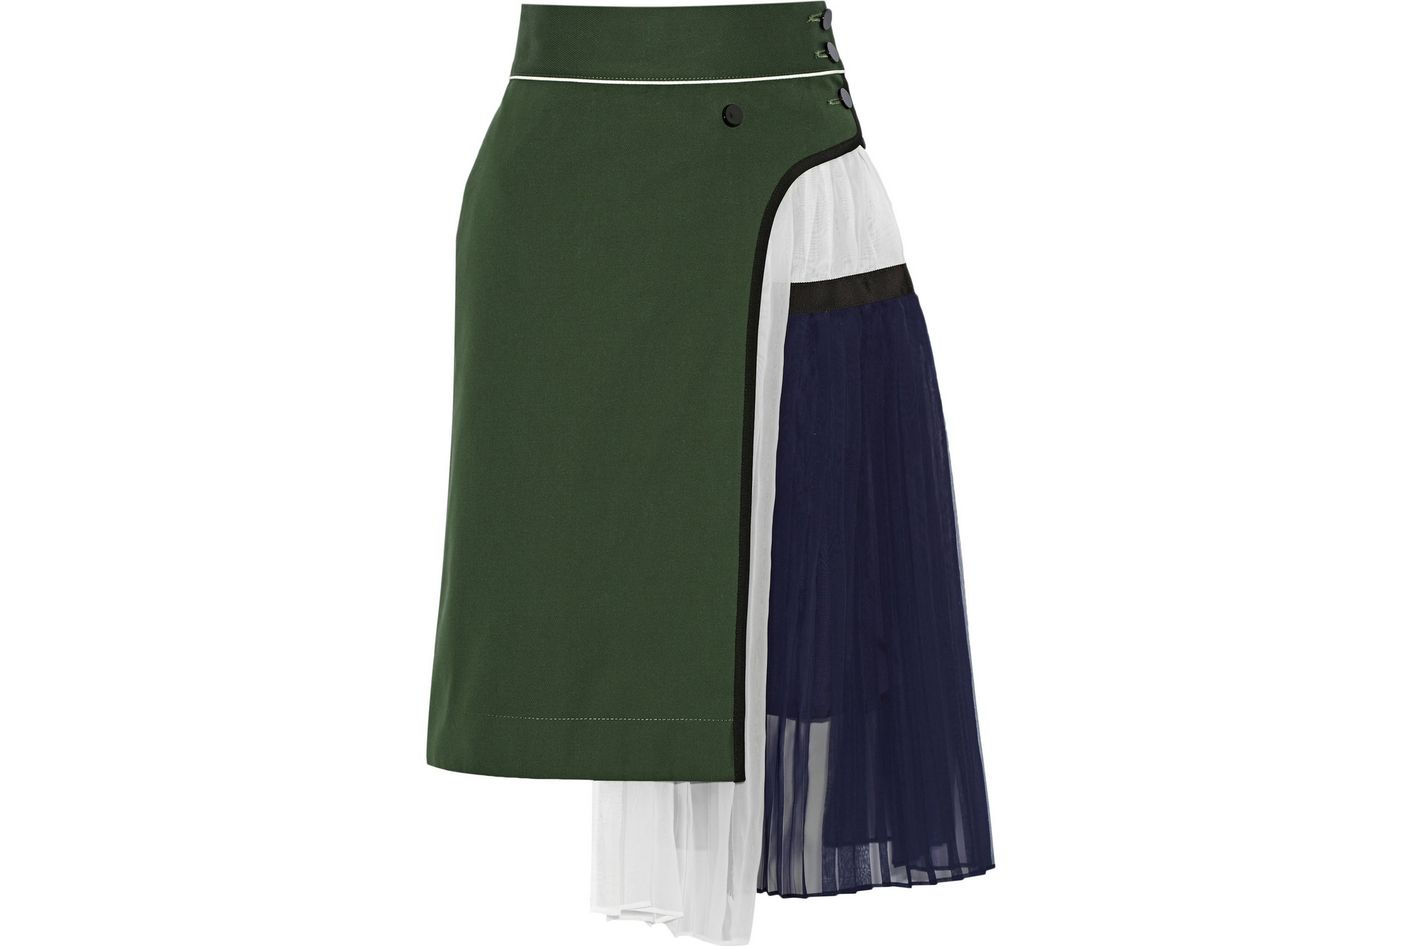 A Strange Skirt That Is Actually Easy to Wear